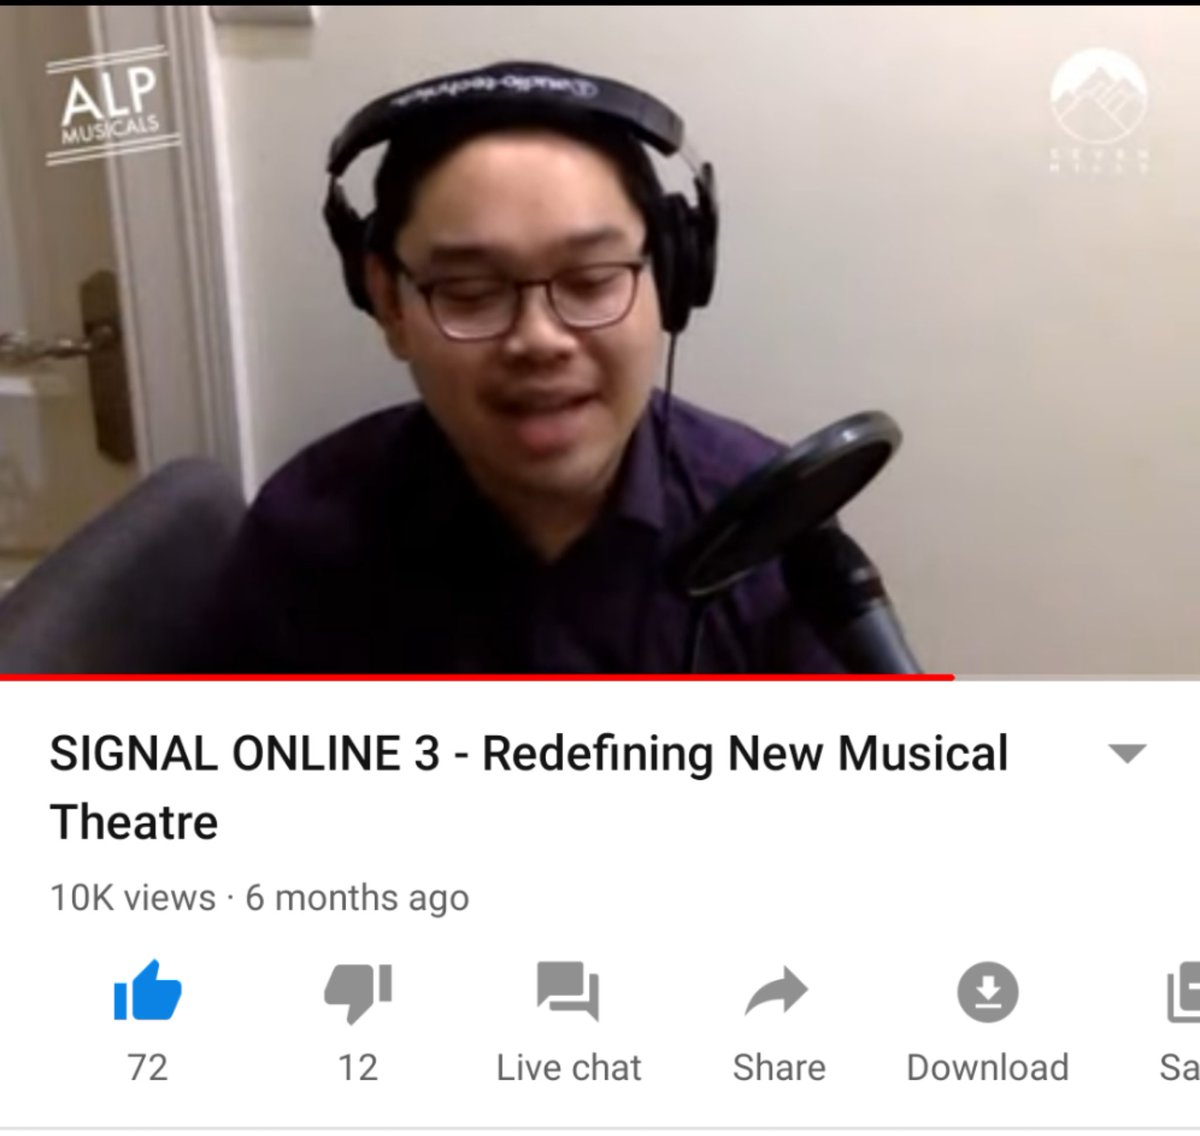 But one writer  @HilmiJaidin saw the livestreams and came up with an idea to conceive a show specifically for this new medium. A piece about how the internet can be used to radicalise people. He premiered the first song from it at SIGNAL ONLINE 3 back in April